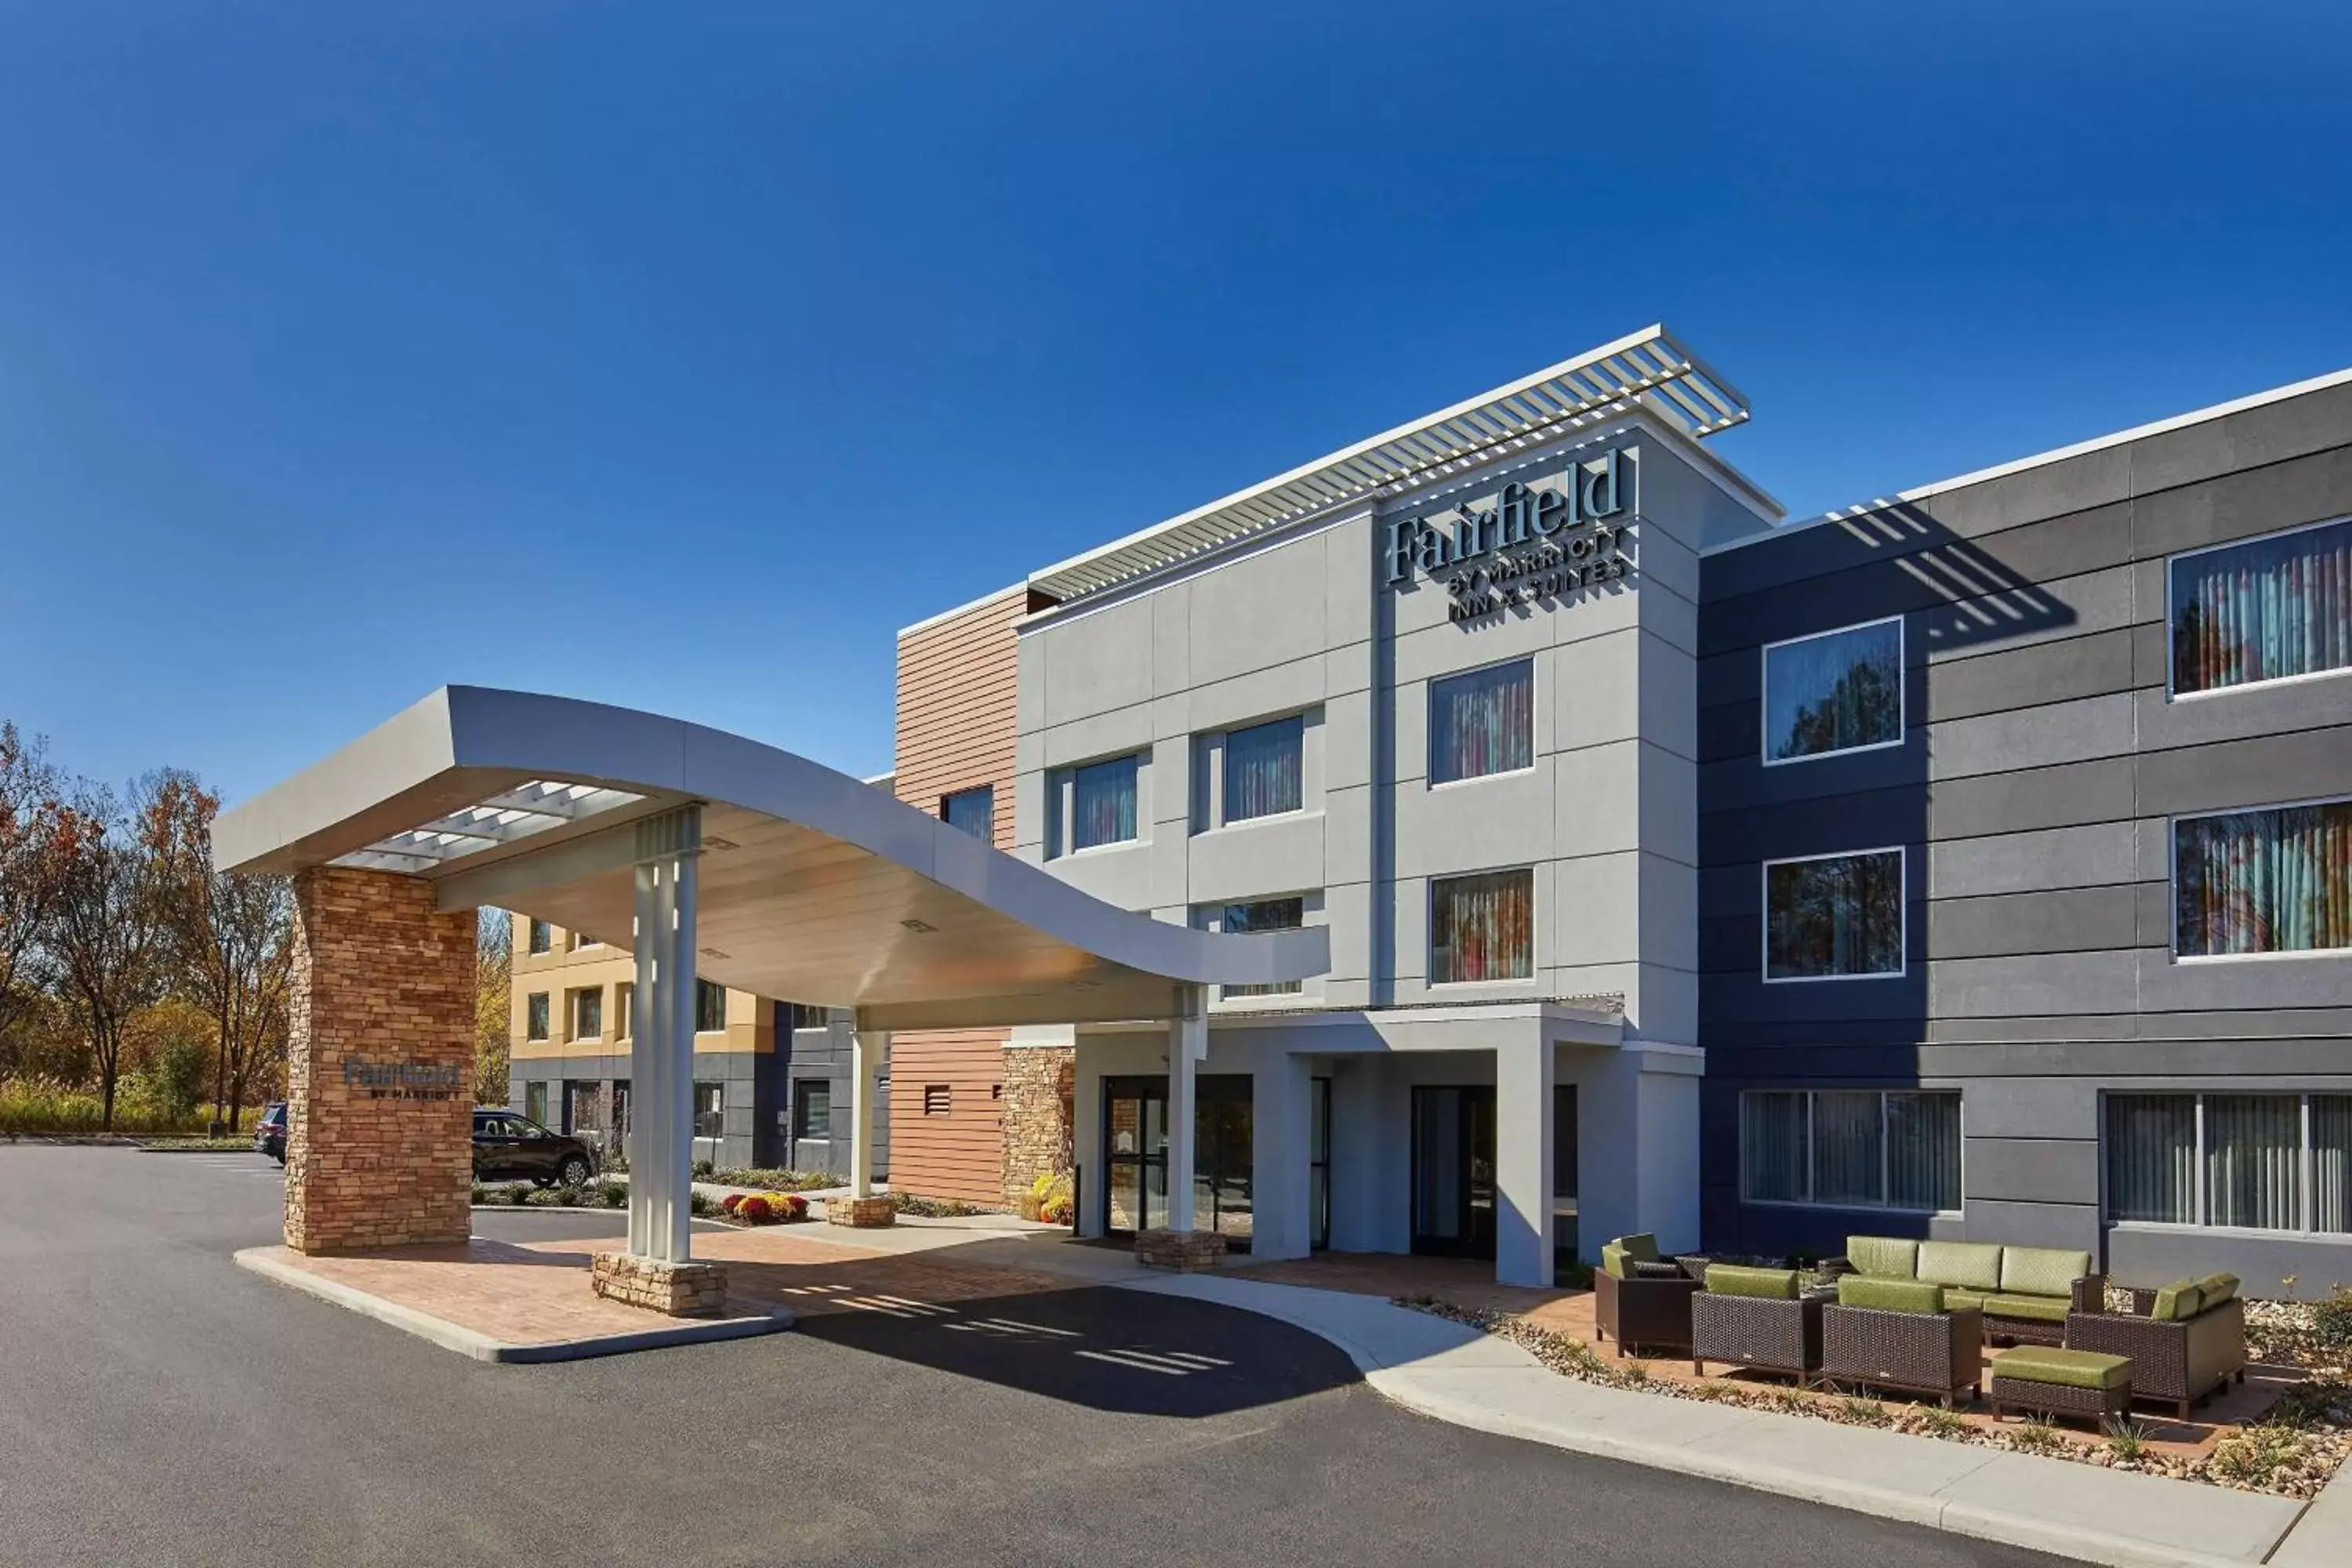 Property Building in Fairfield Inn & Suites by Marriott Albany Airport